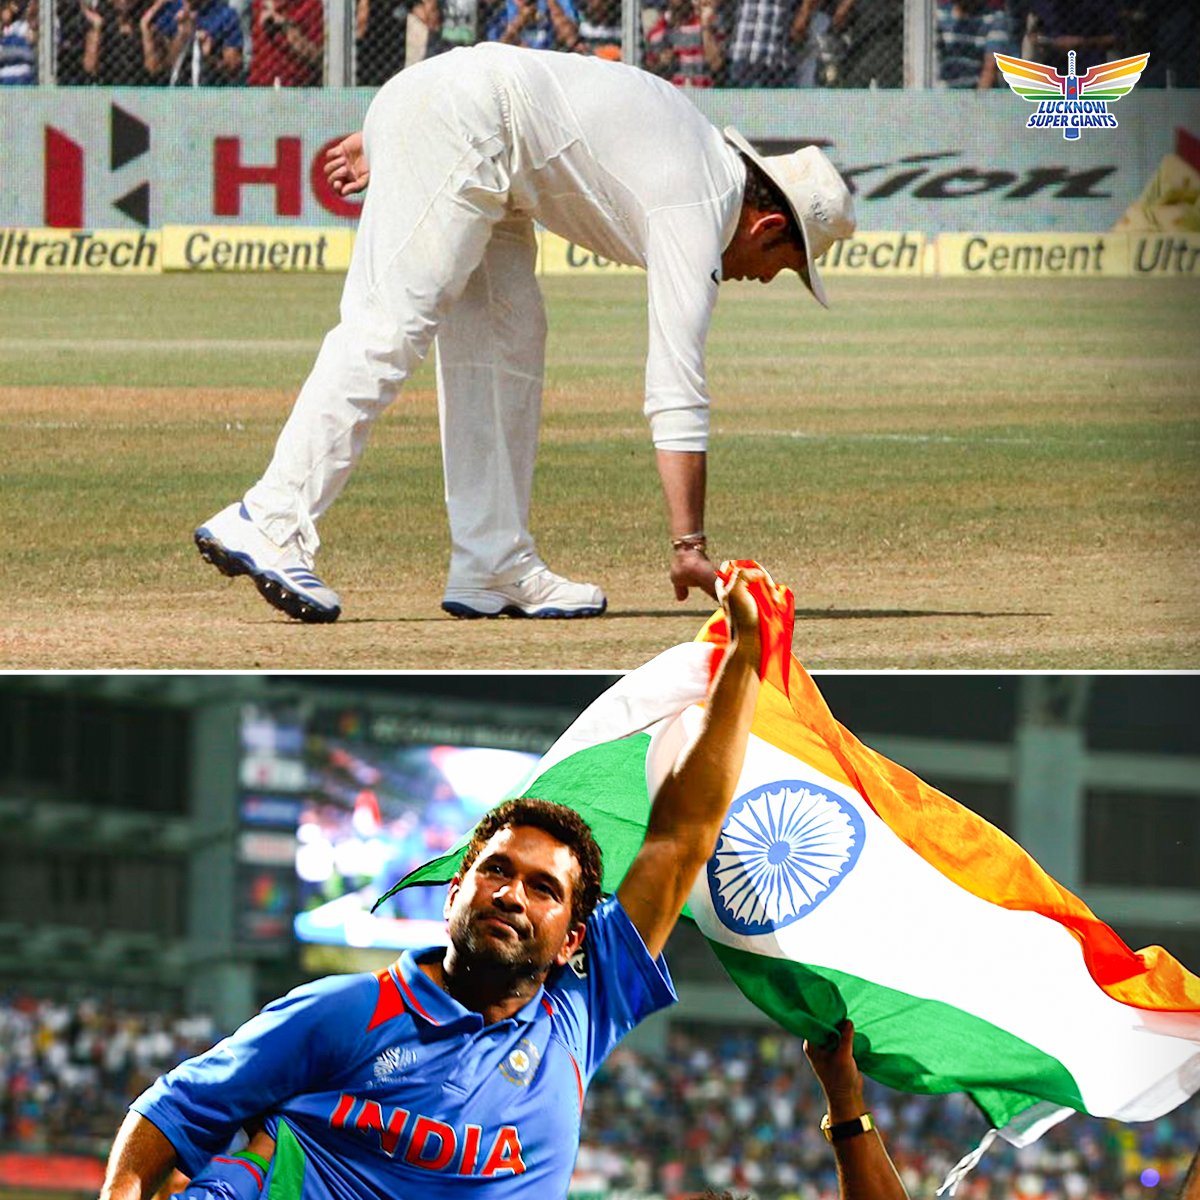 Apr 24 - the date that changed Indian cricket forever 🇮🇳 Happy birthday, Sachin 🙏